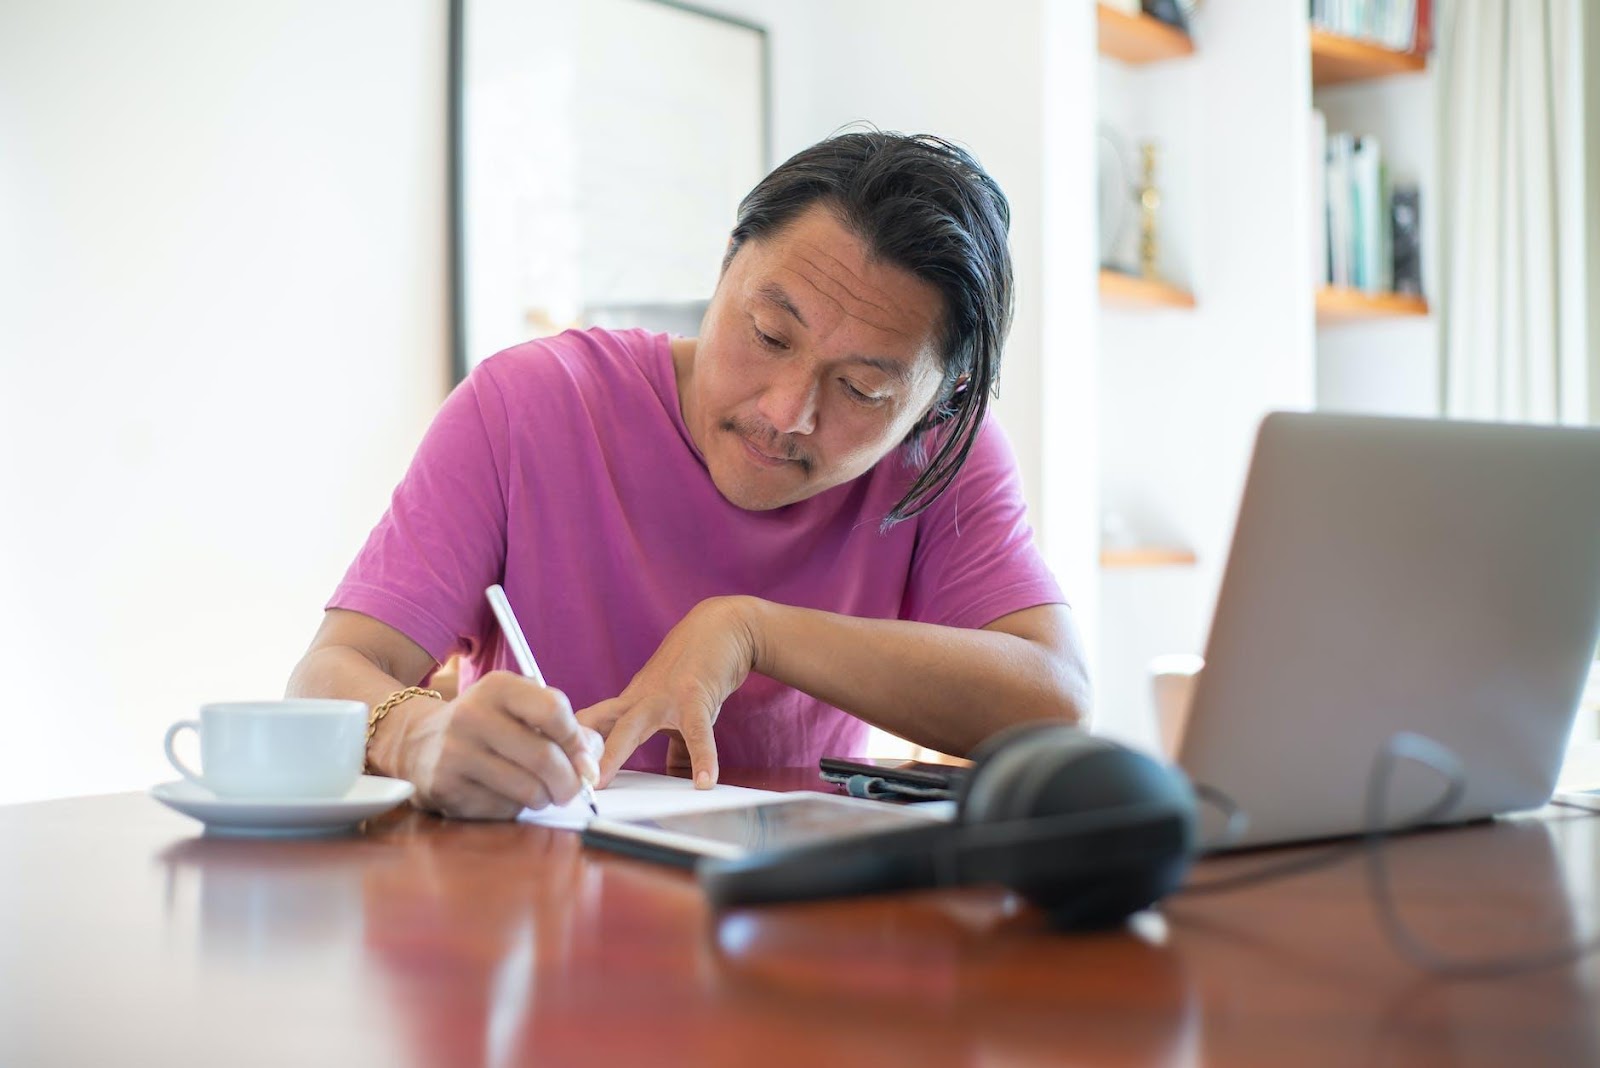 A Man in Pink Shirt Writing on the Table